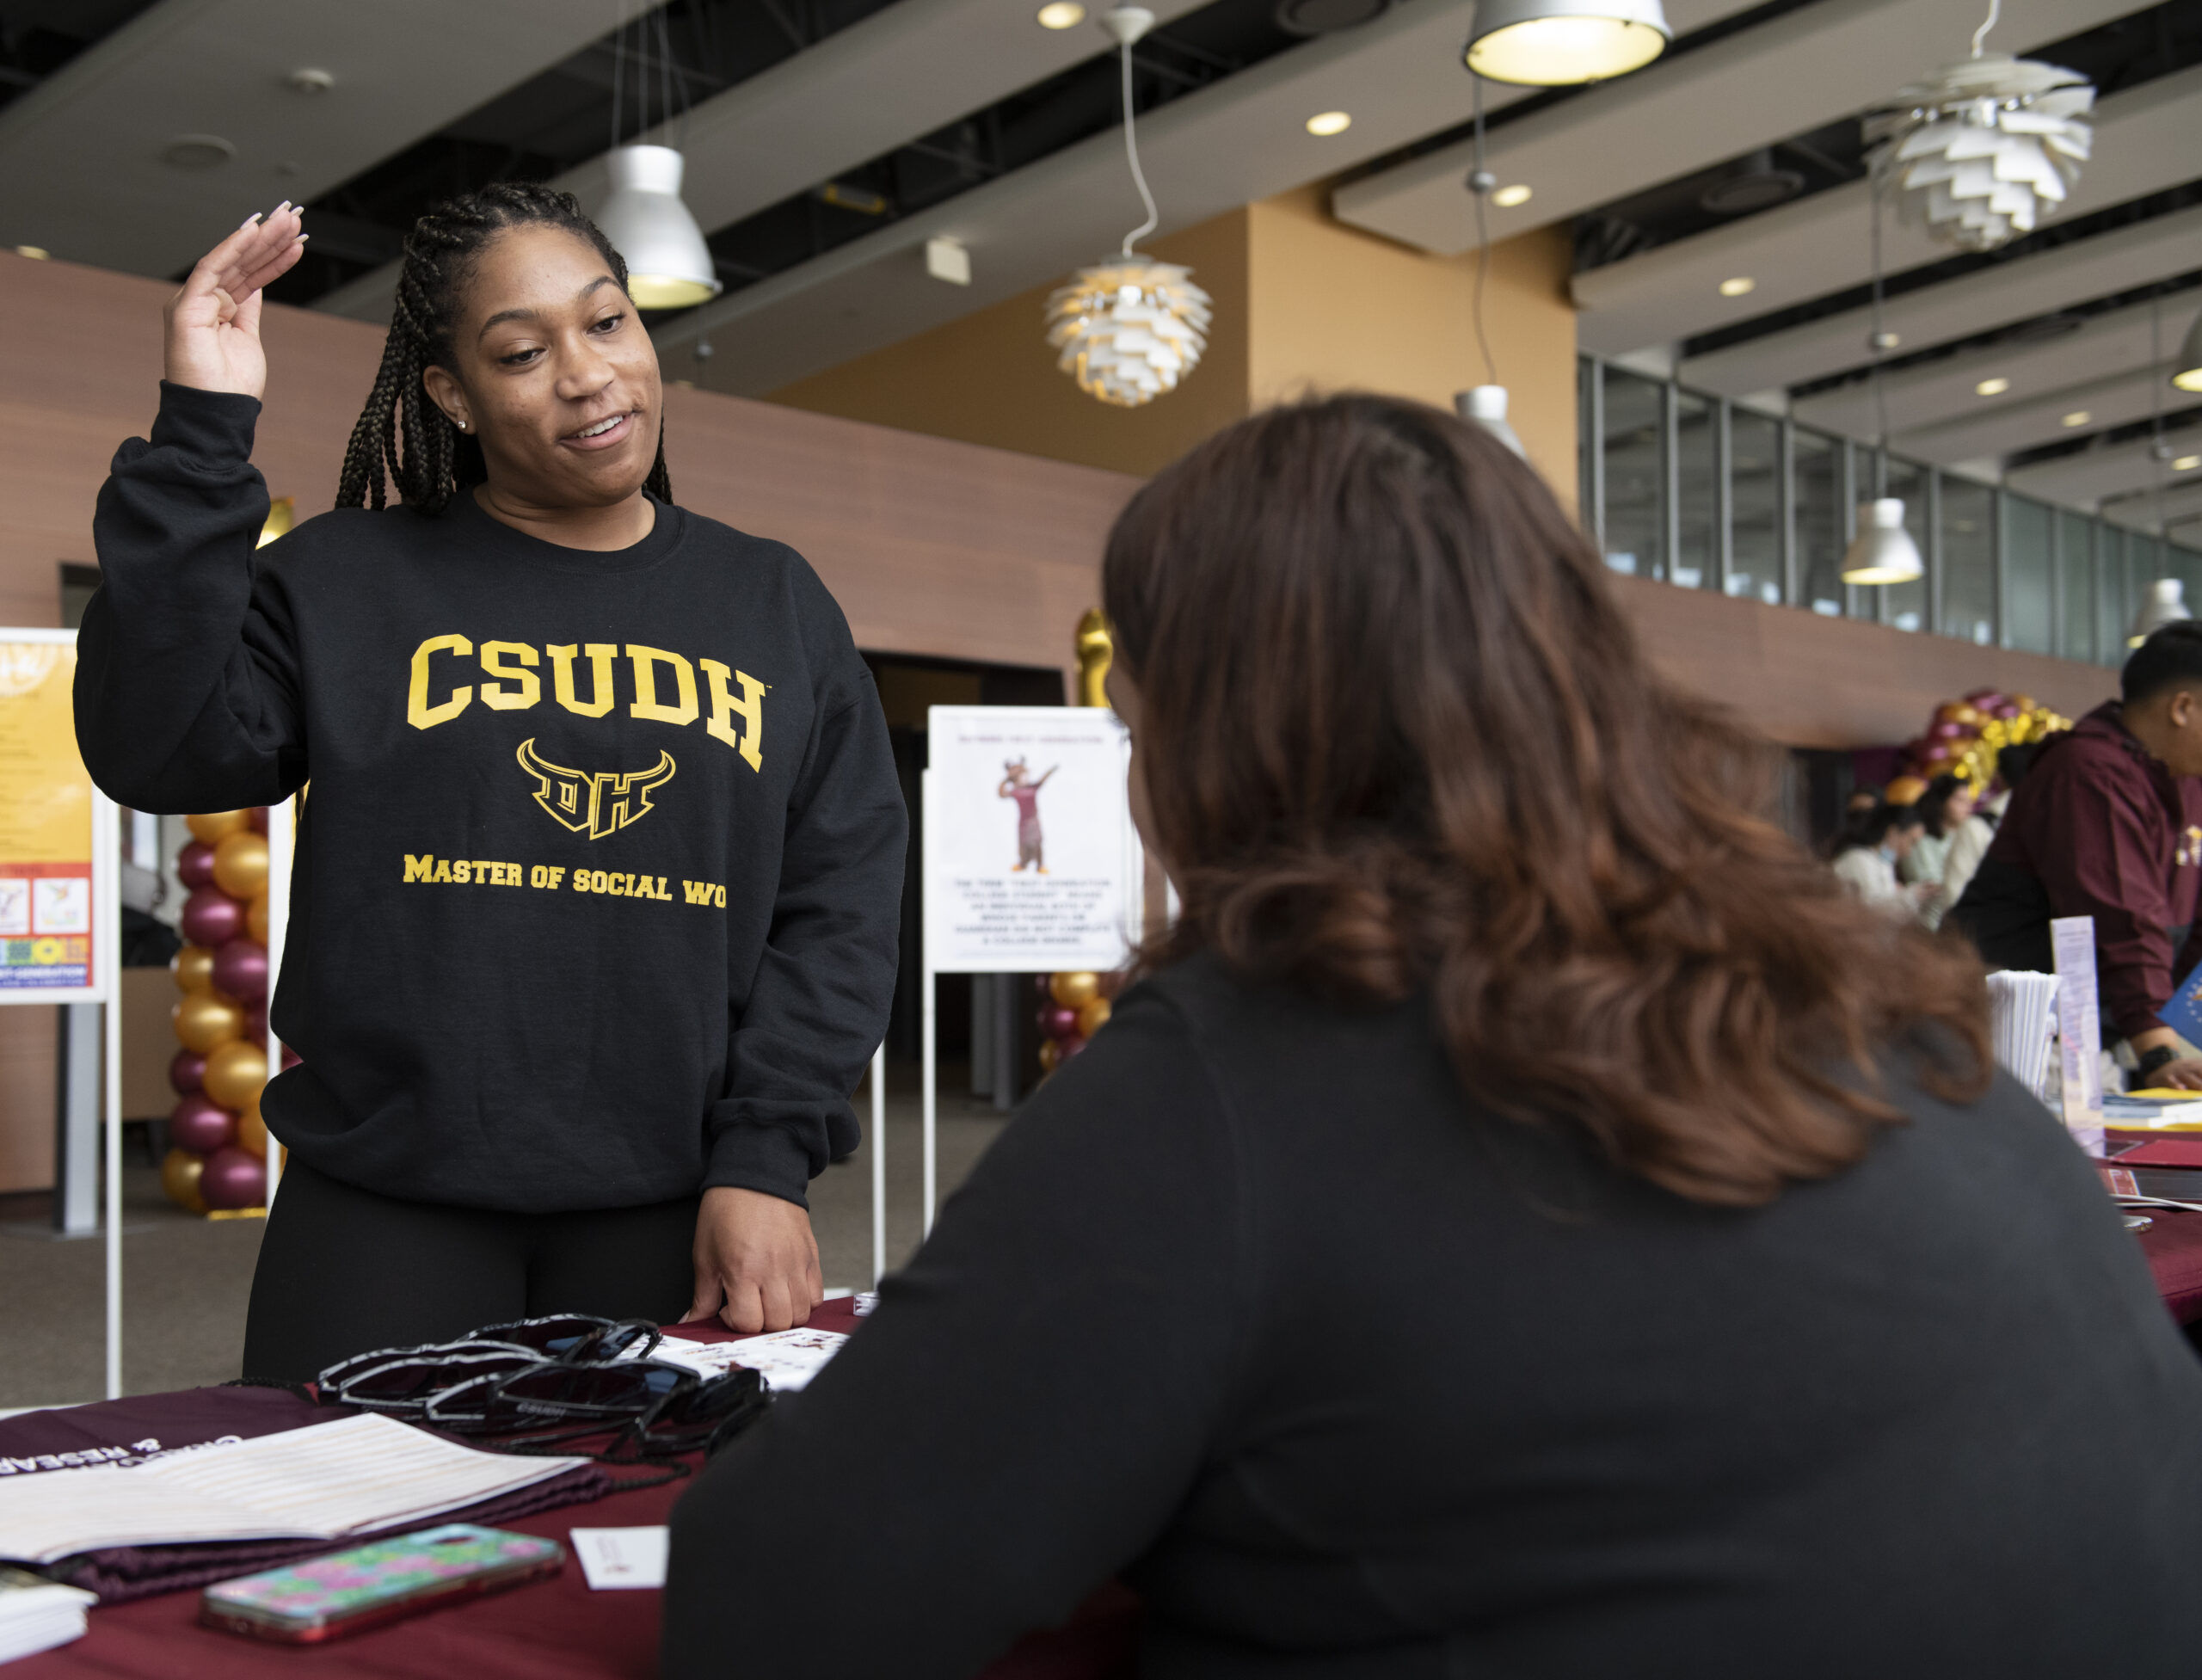 Masters of social worker student visits table at 4th annual 1st Gen student celebration